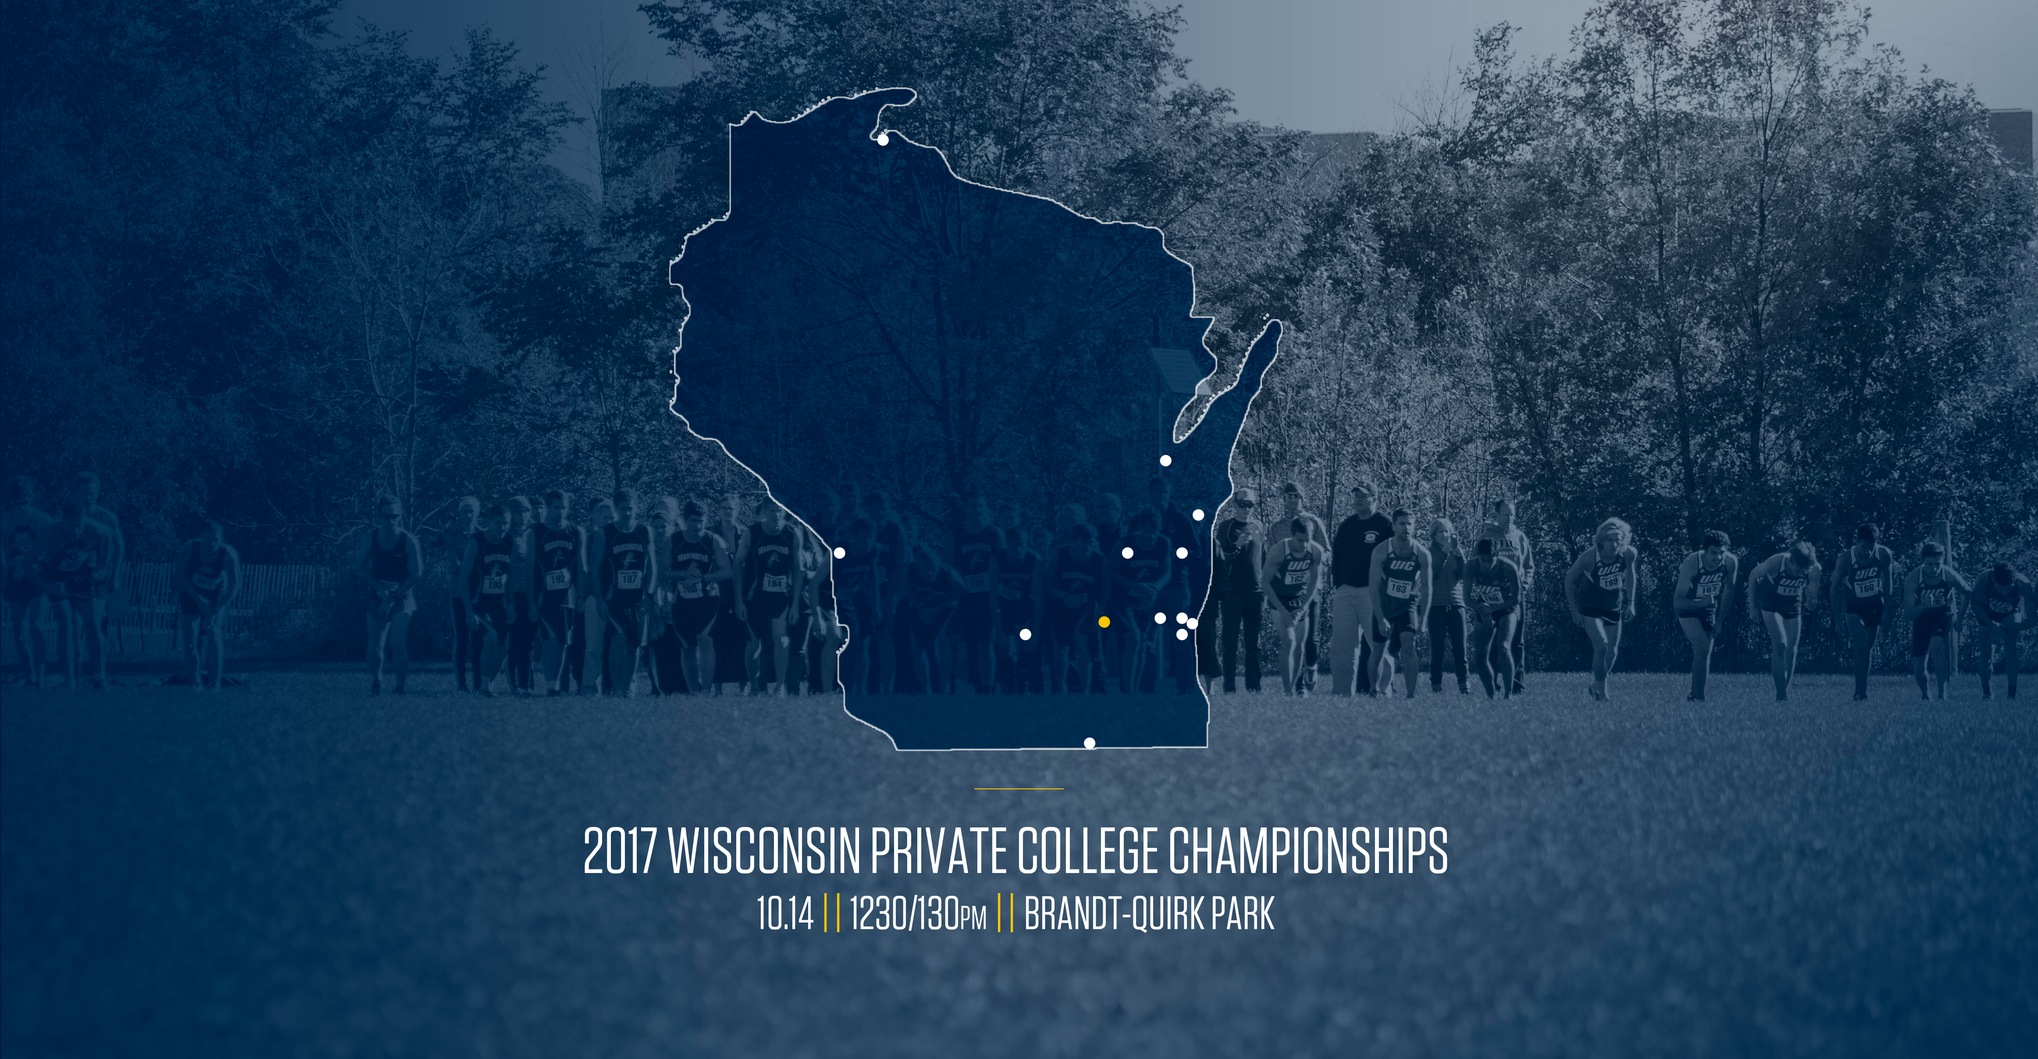 Maranatha to Host Wisconsin Private College Championships